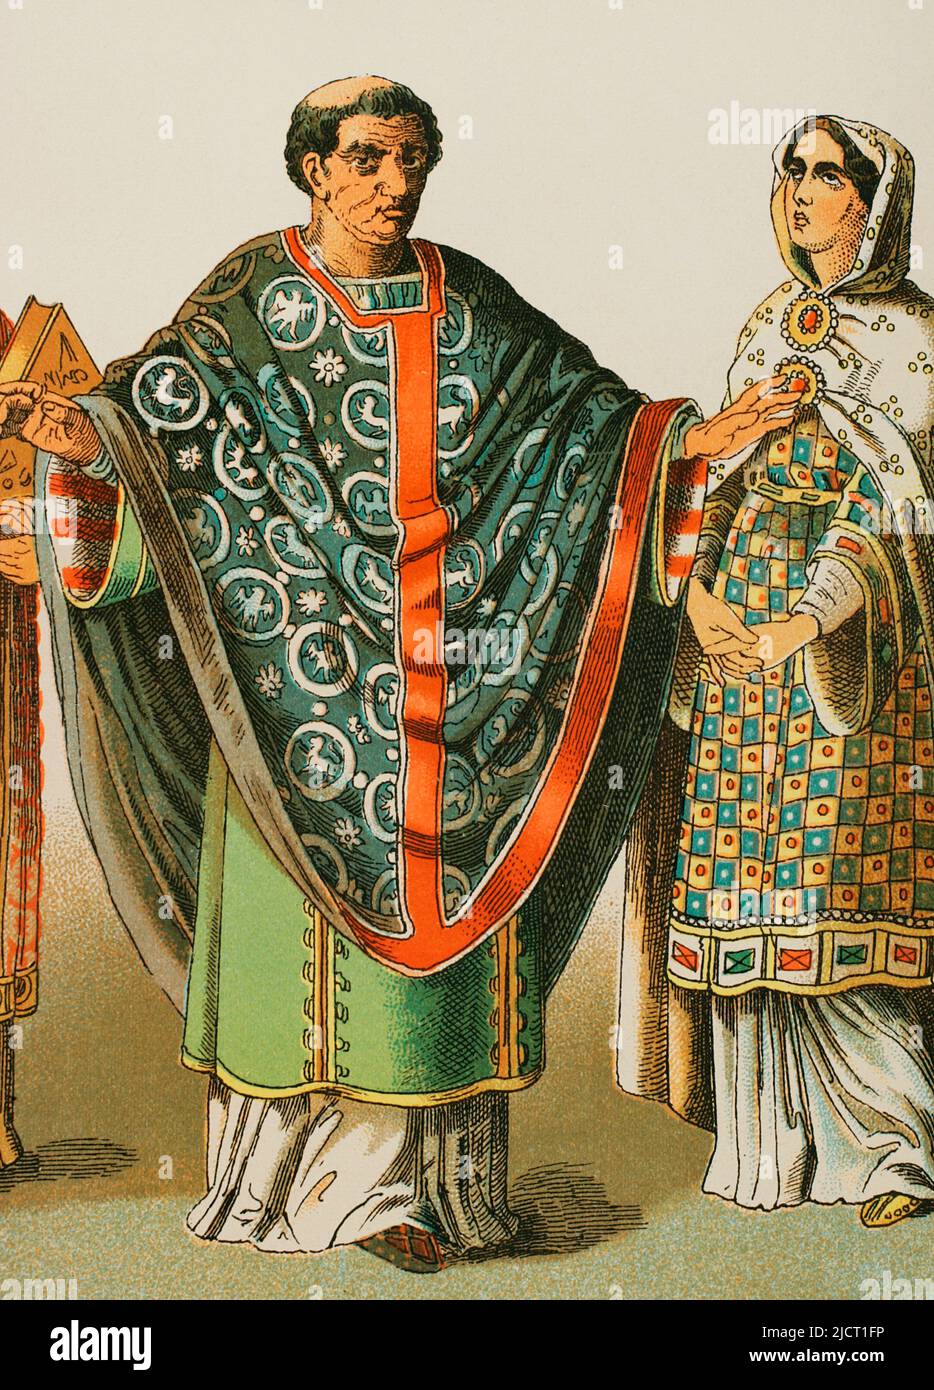 France (year 900). Bishop and noblewoman. Chromolithography. 'Historia Universal' (Universal History), by César Cantú. Volume IV. Published in Barcelona, 1881. Stock Photo